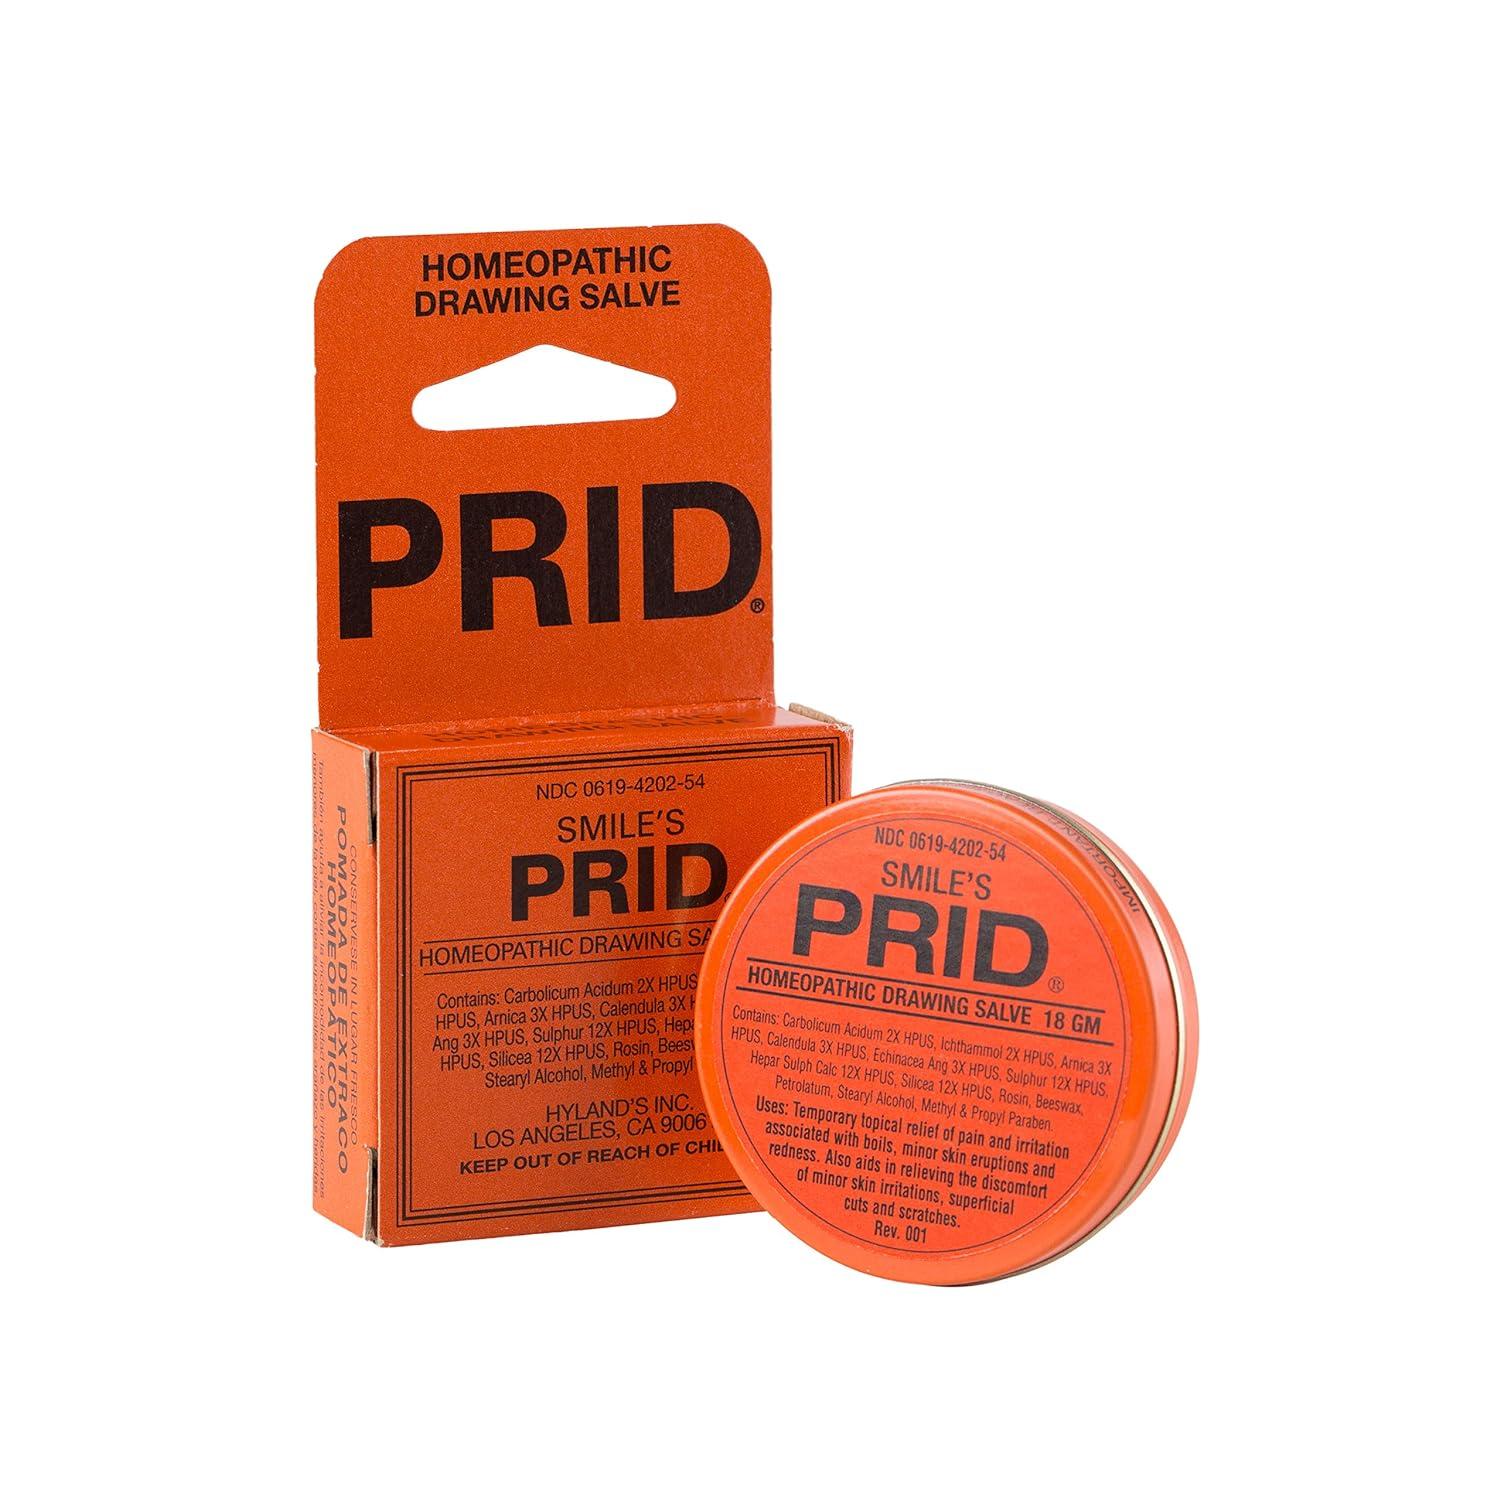 Smile's PRID Drawing Salve by Hyland's Relief of Topical Pain and